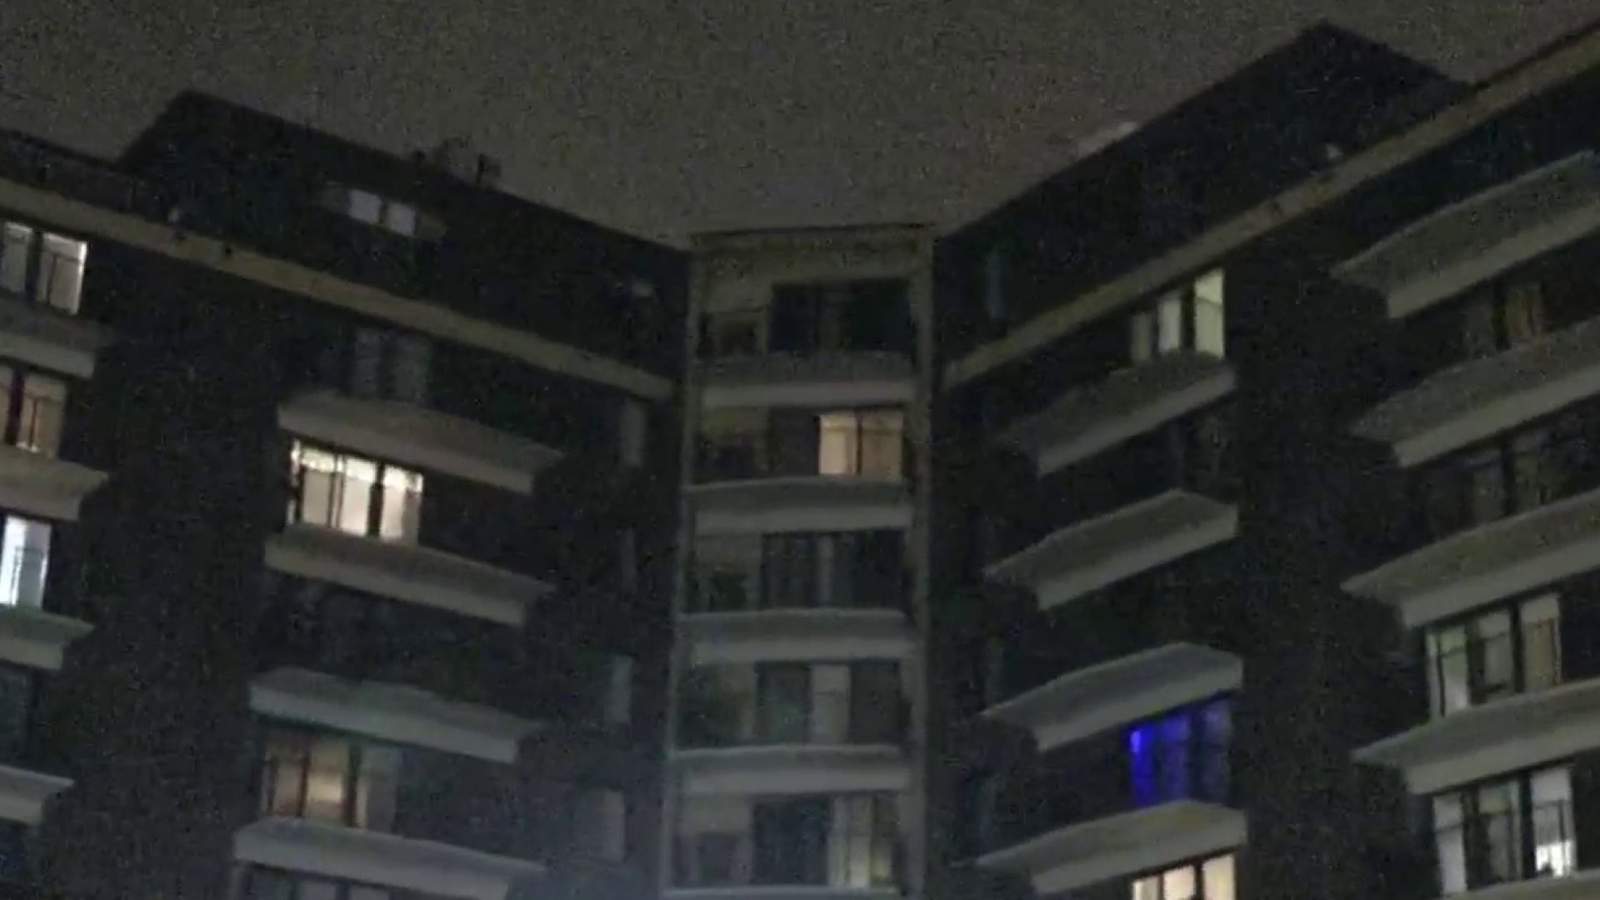 2-year-old dies after falling from 9th floor window of Southfield apartment